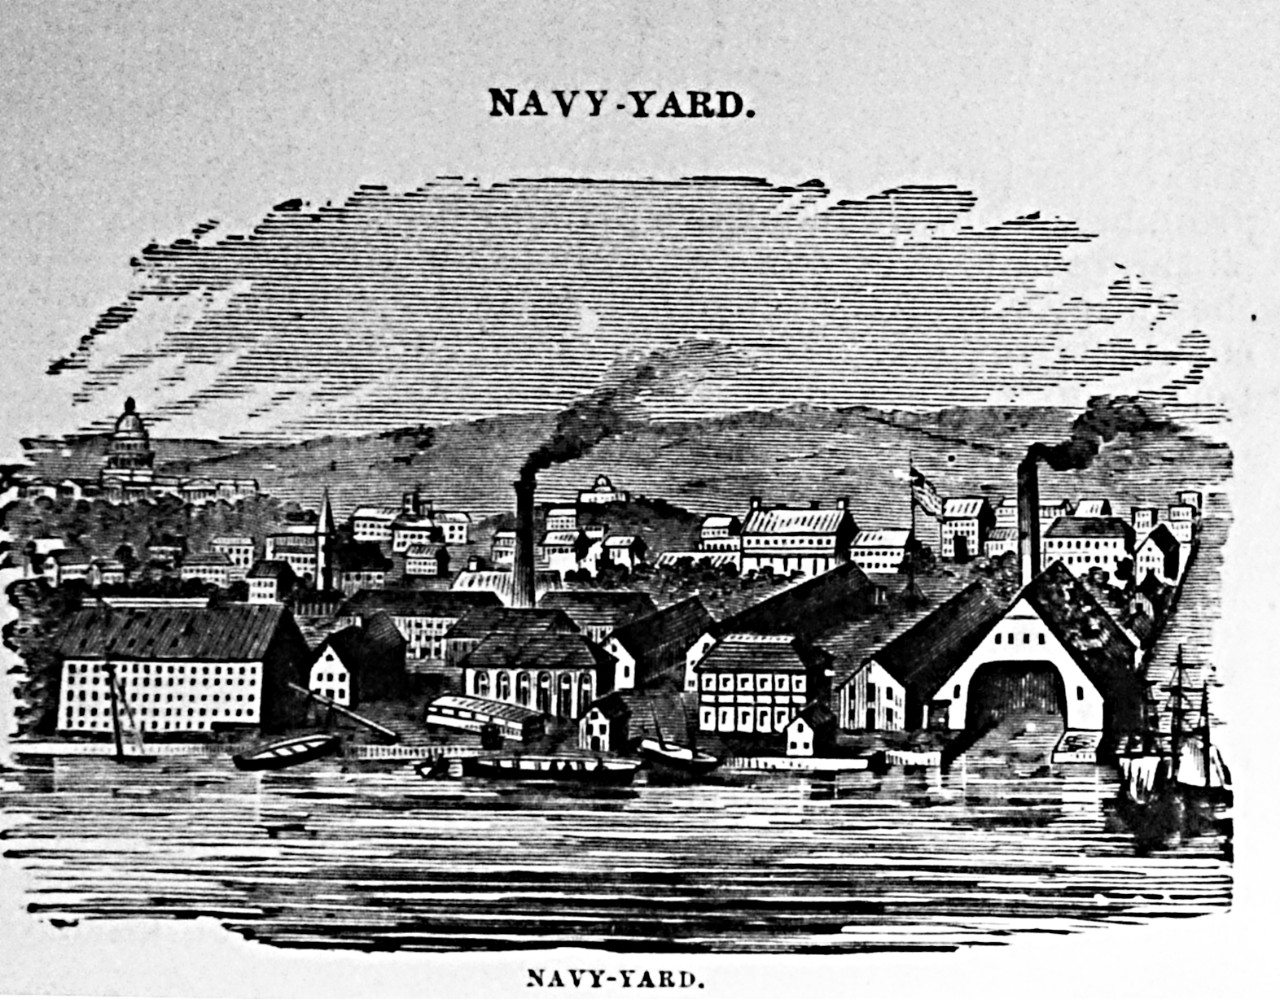 Washington Navy Yard, about 1880.   Washington Navy Yard, District of Columbia, depicting the Navy Yard in about 1880, looking north from the hills beyond the southern side of the Anacostia River. The U.S. Capitol is in the left center distance.    Courtesy of the Martin Luther King Library, Washington, D.C.